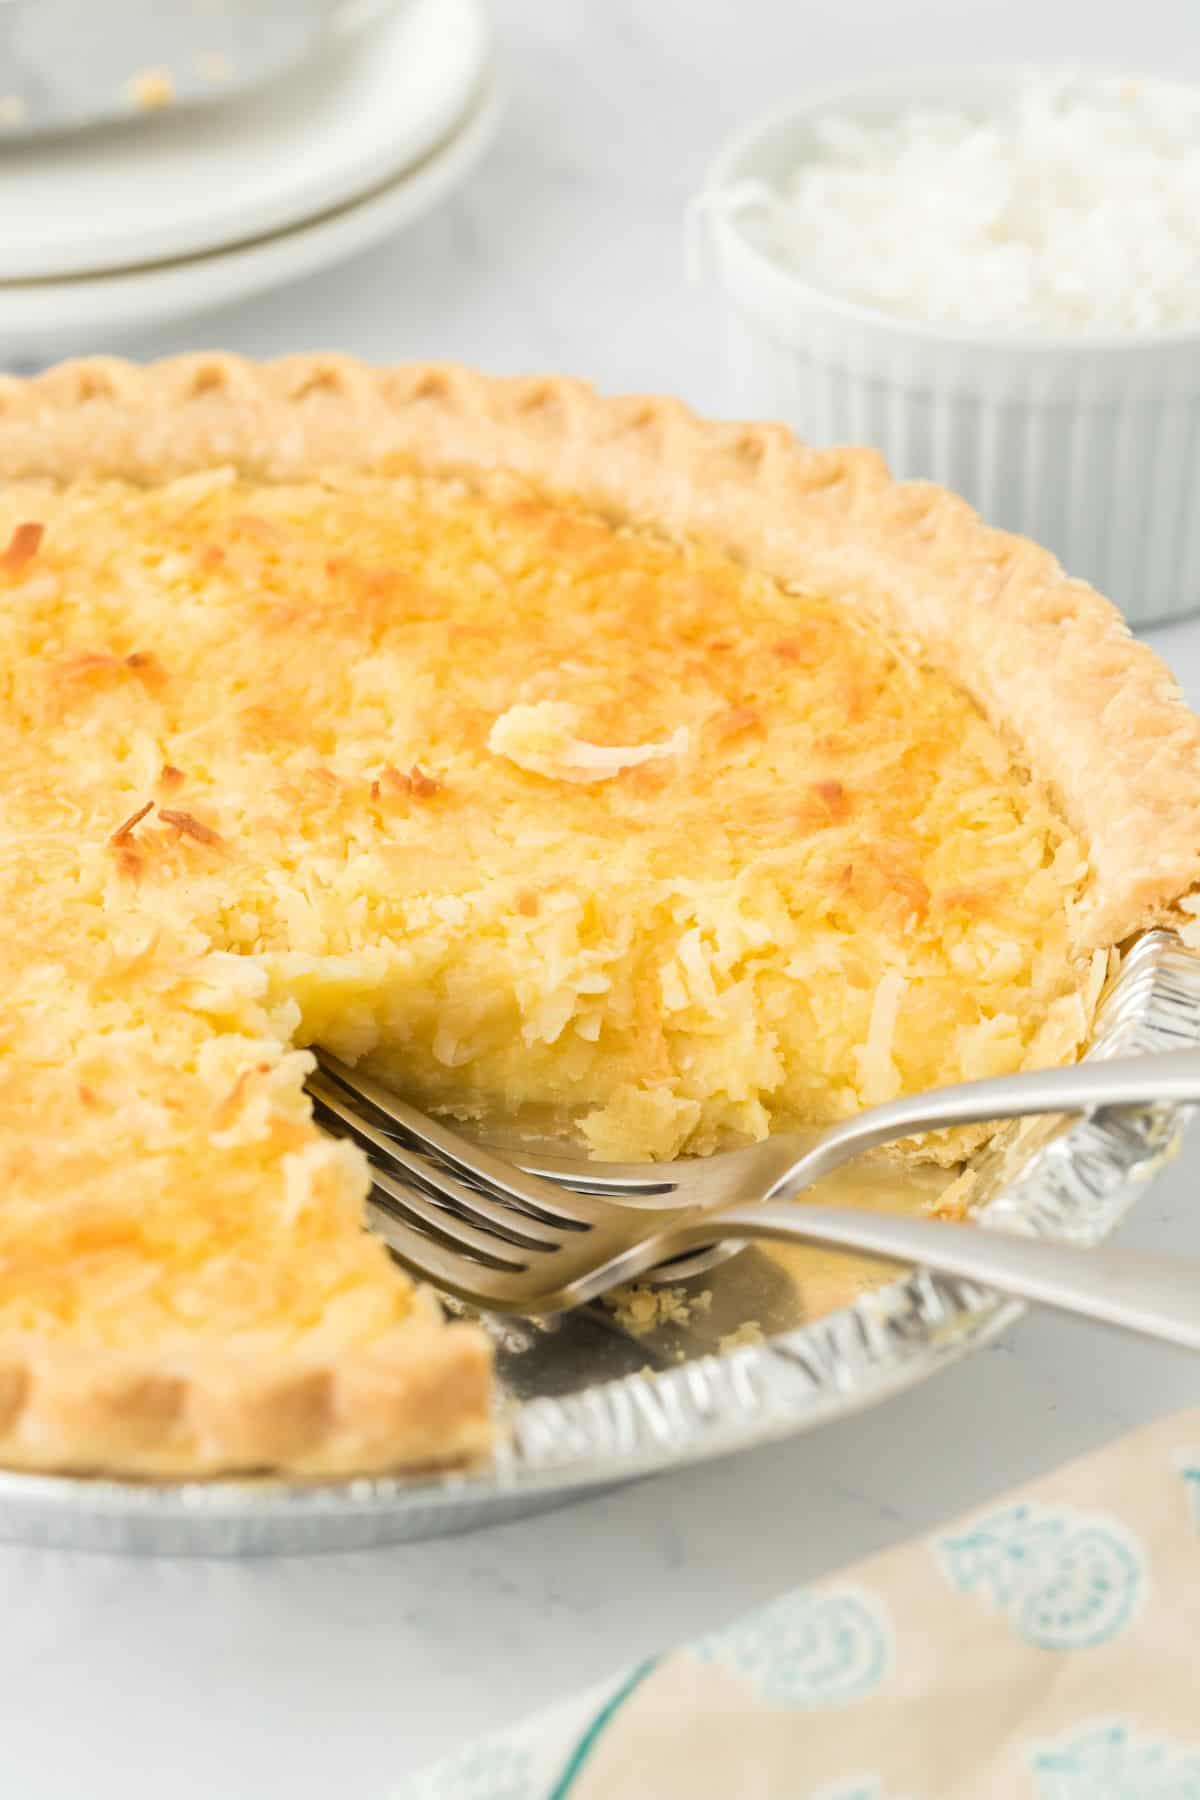 Closeup of a coconut custard pie with a slice removed, revealing its creamy interior. A fork is in the pie tin, and a bowl of shredded coconut is in the background